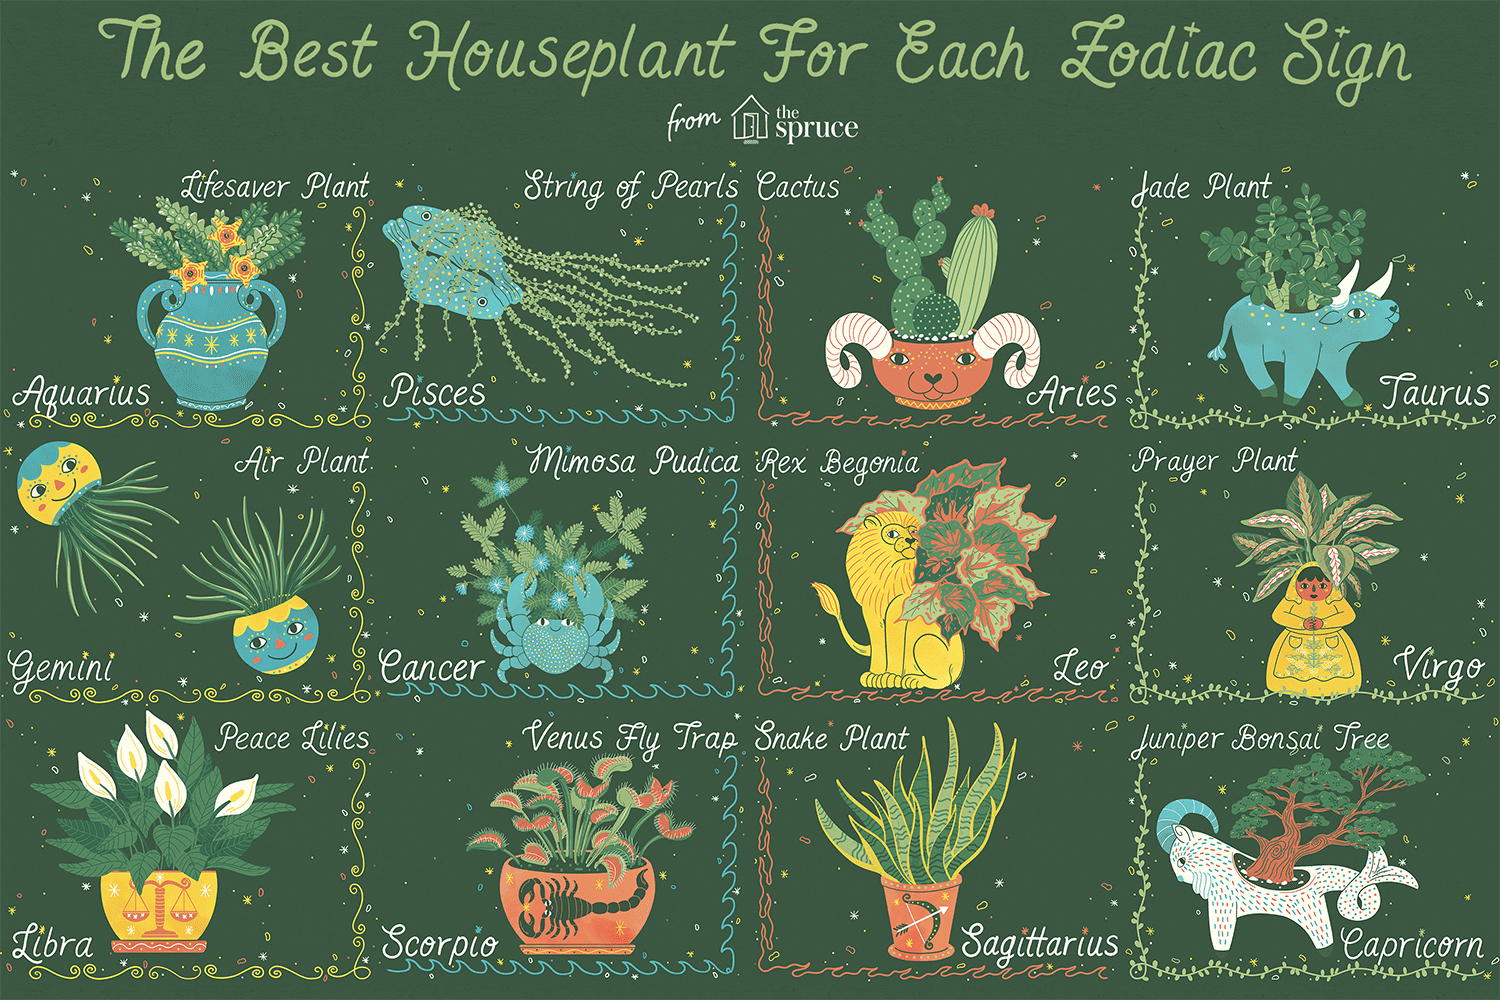 The Best Houseplant for You, Based on Your Zodiac Sign